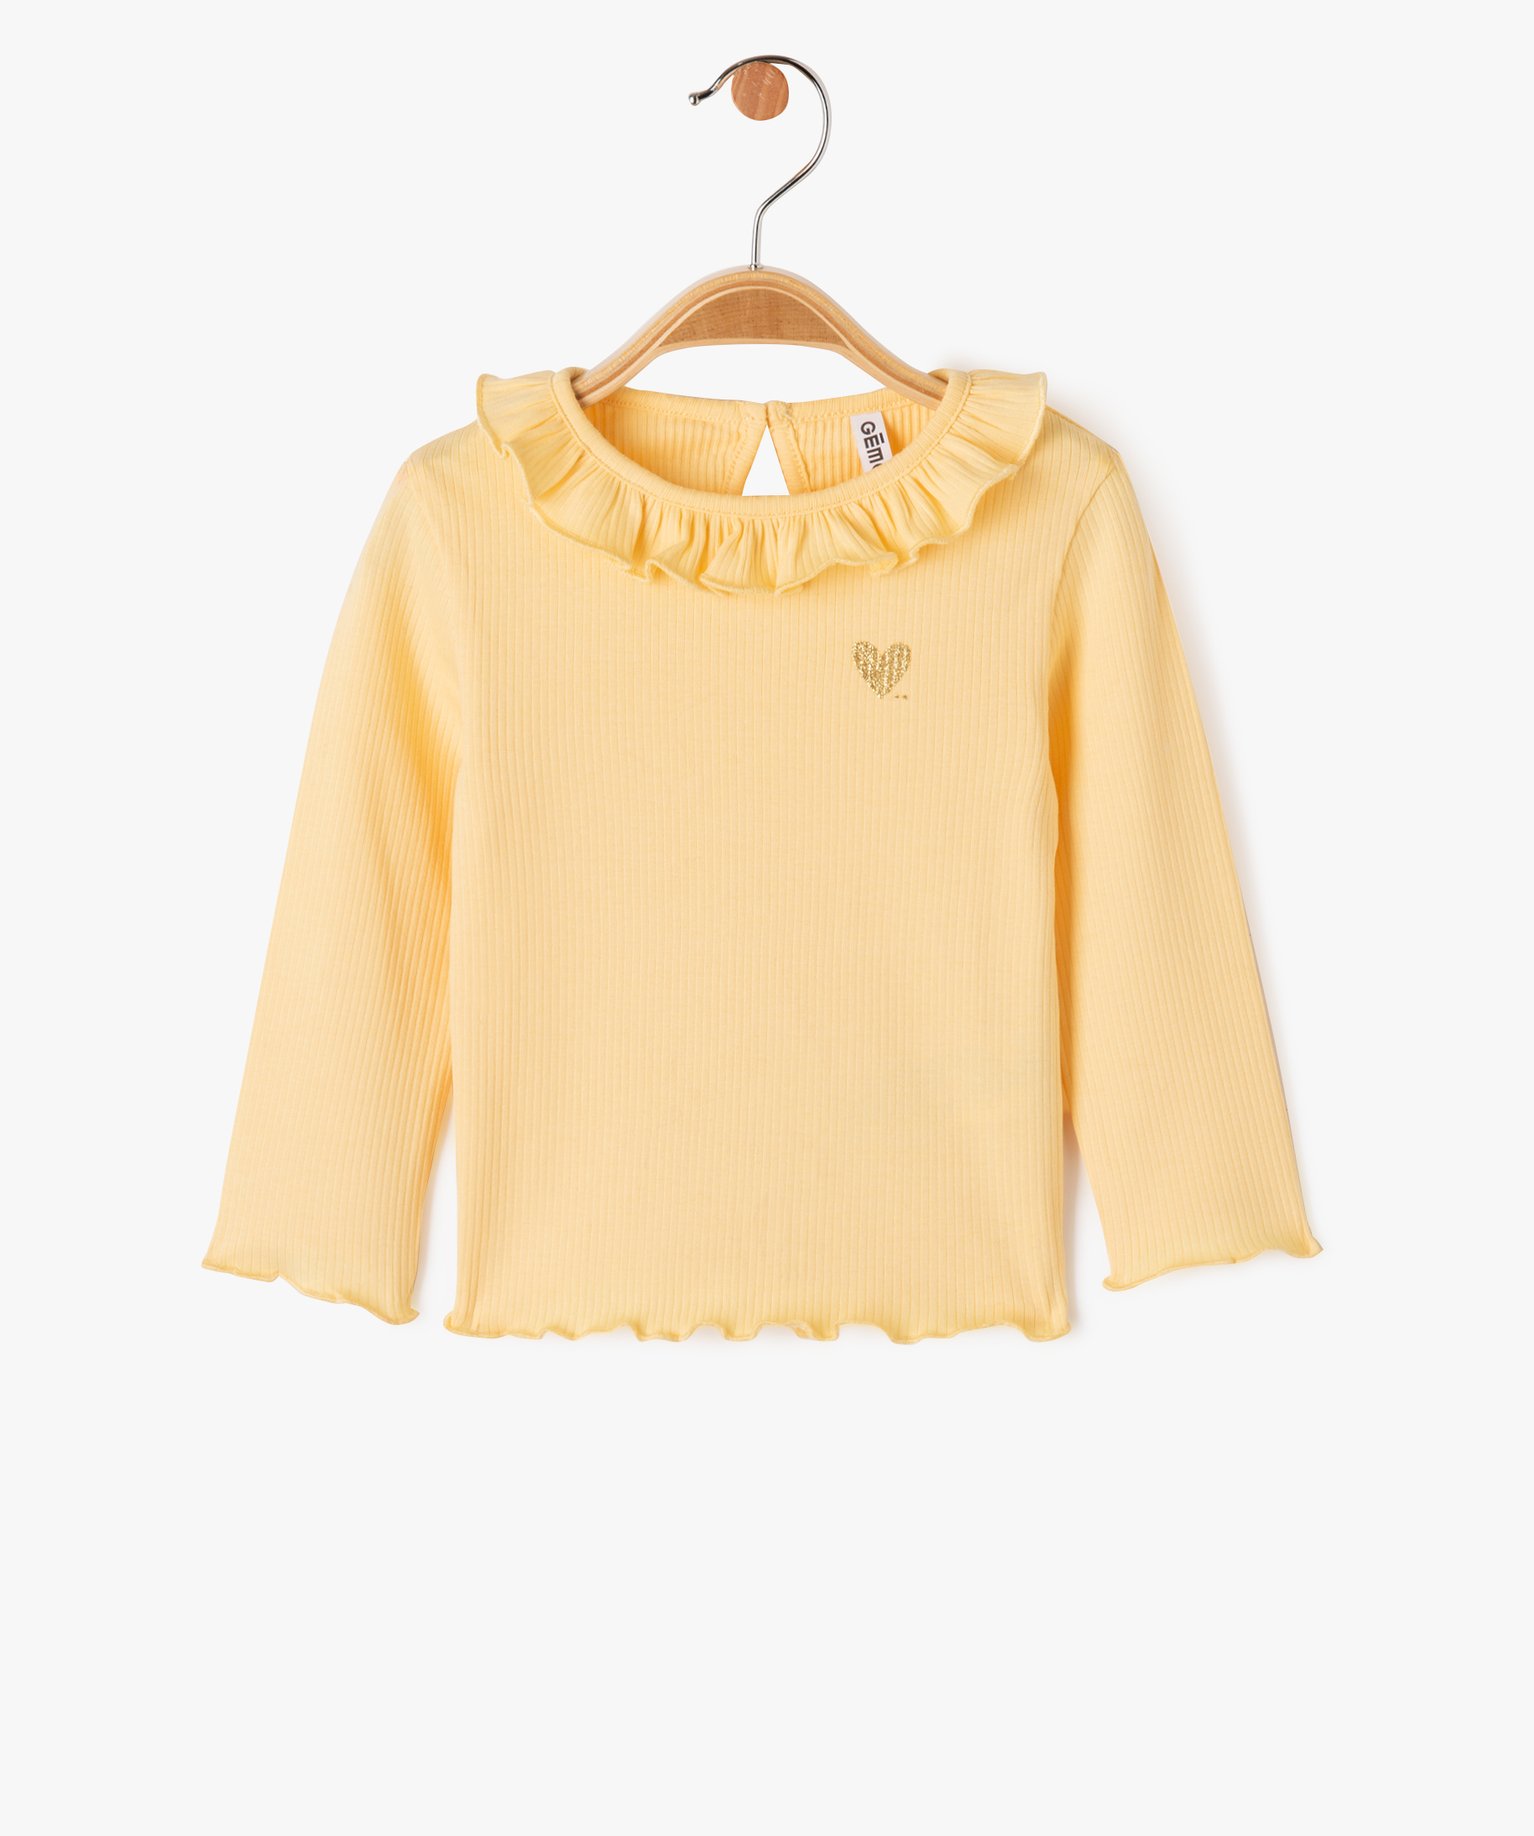 tee-shirt a manches longues avec finitions volantees bebe fille jaune tee-shirts manches longues